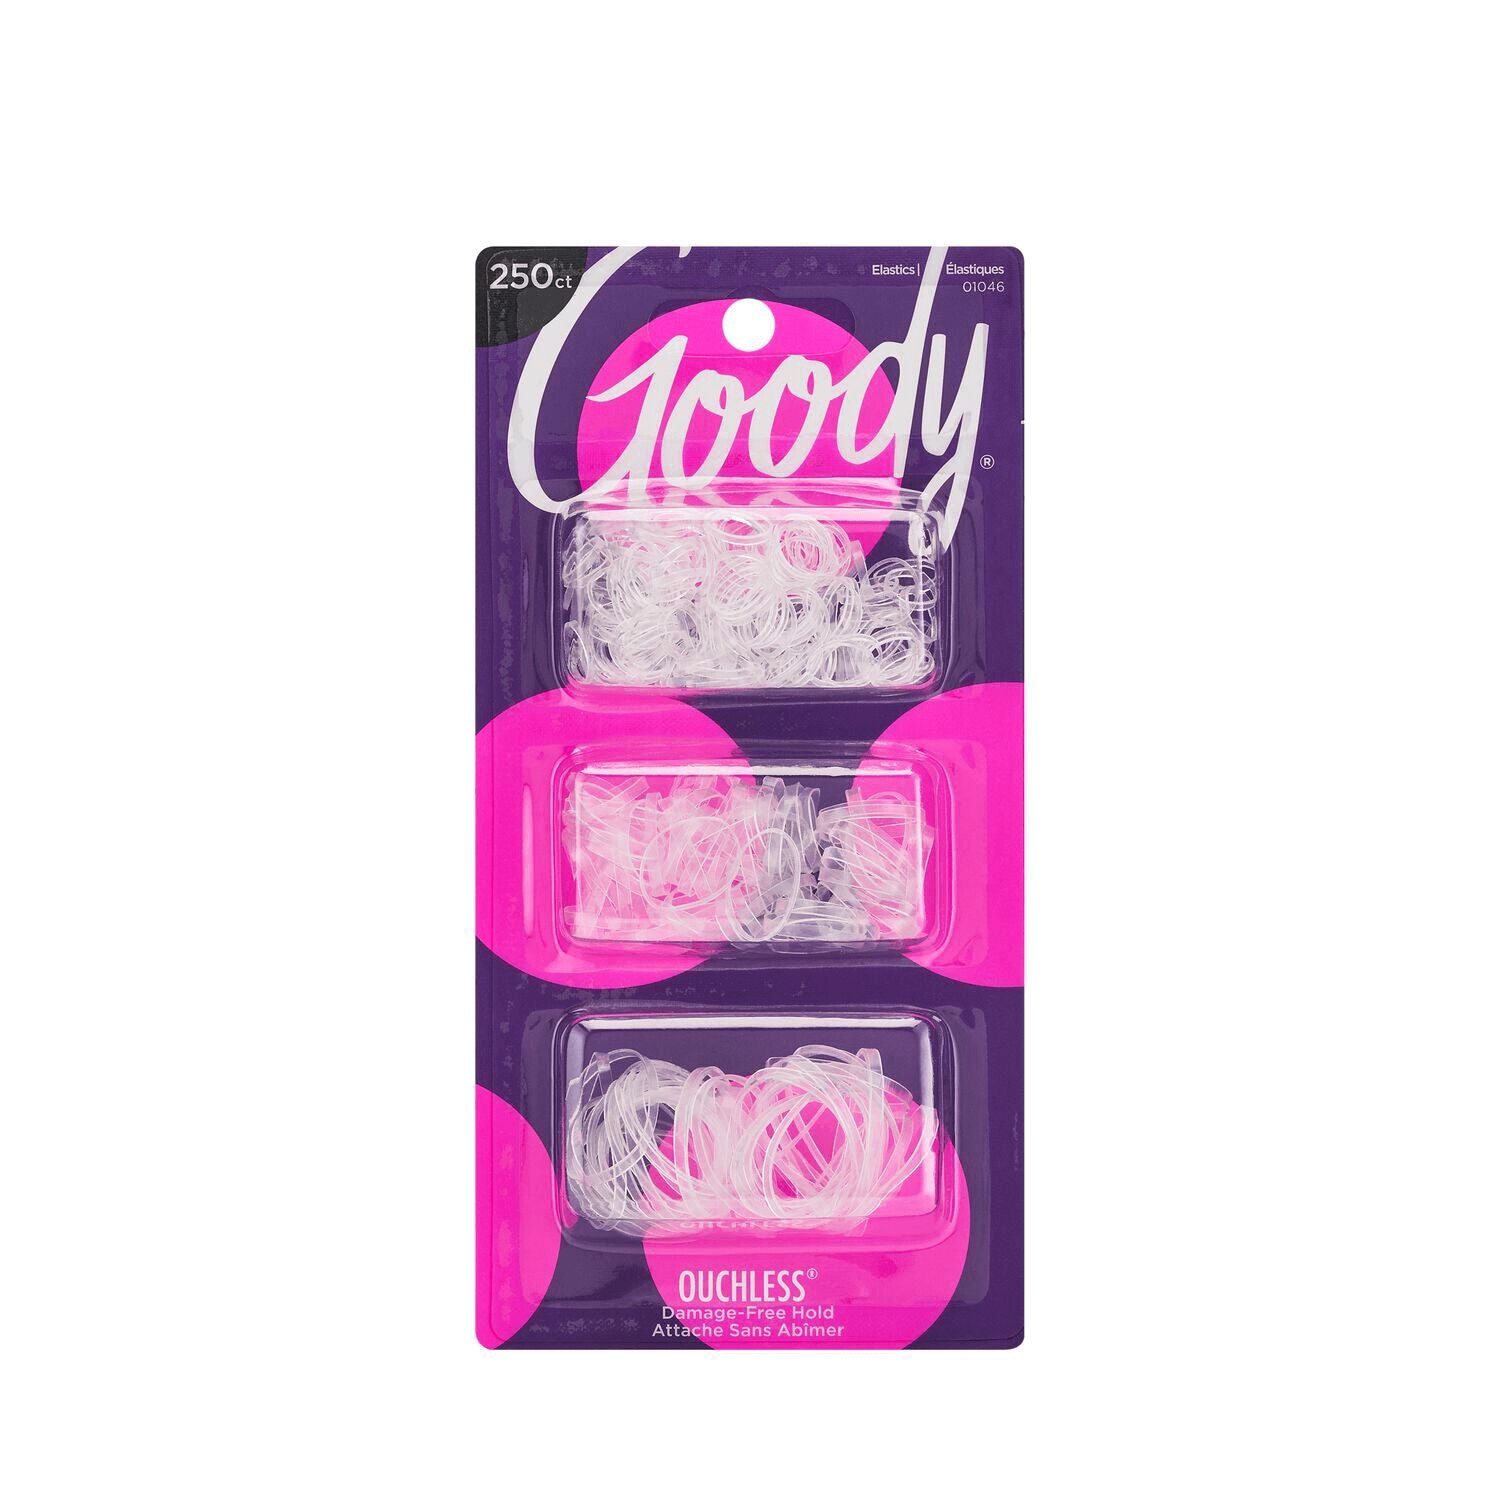 Goody Rubber Bands for Fine Hair 250 Count